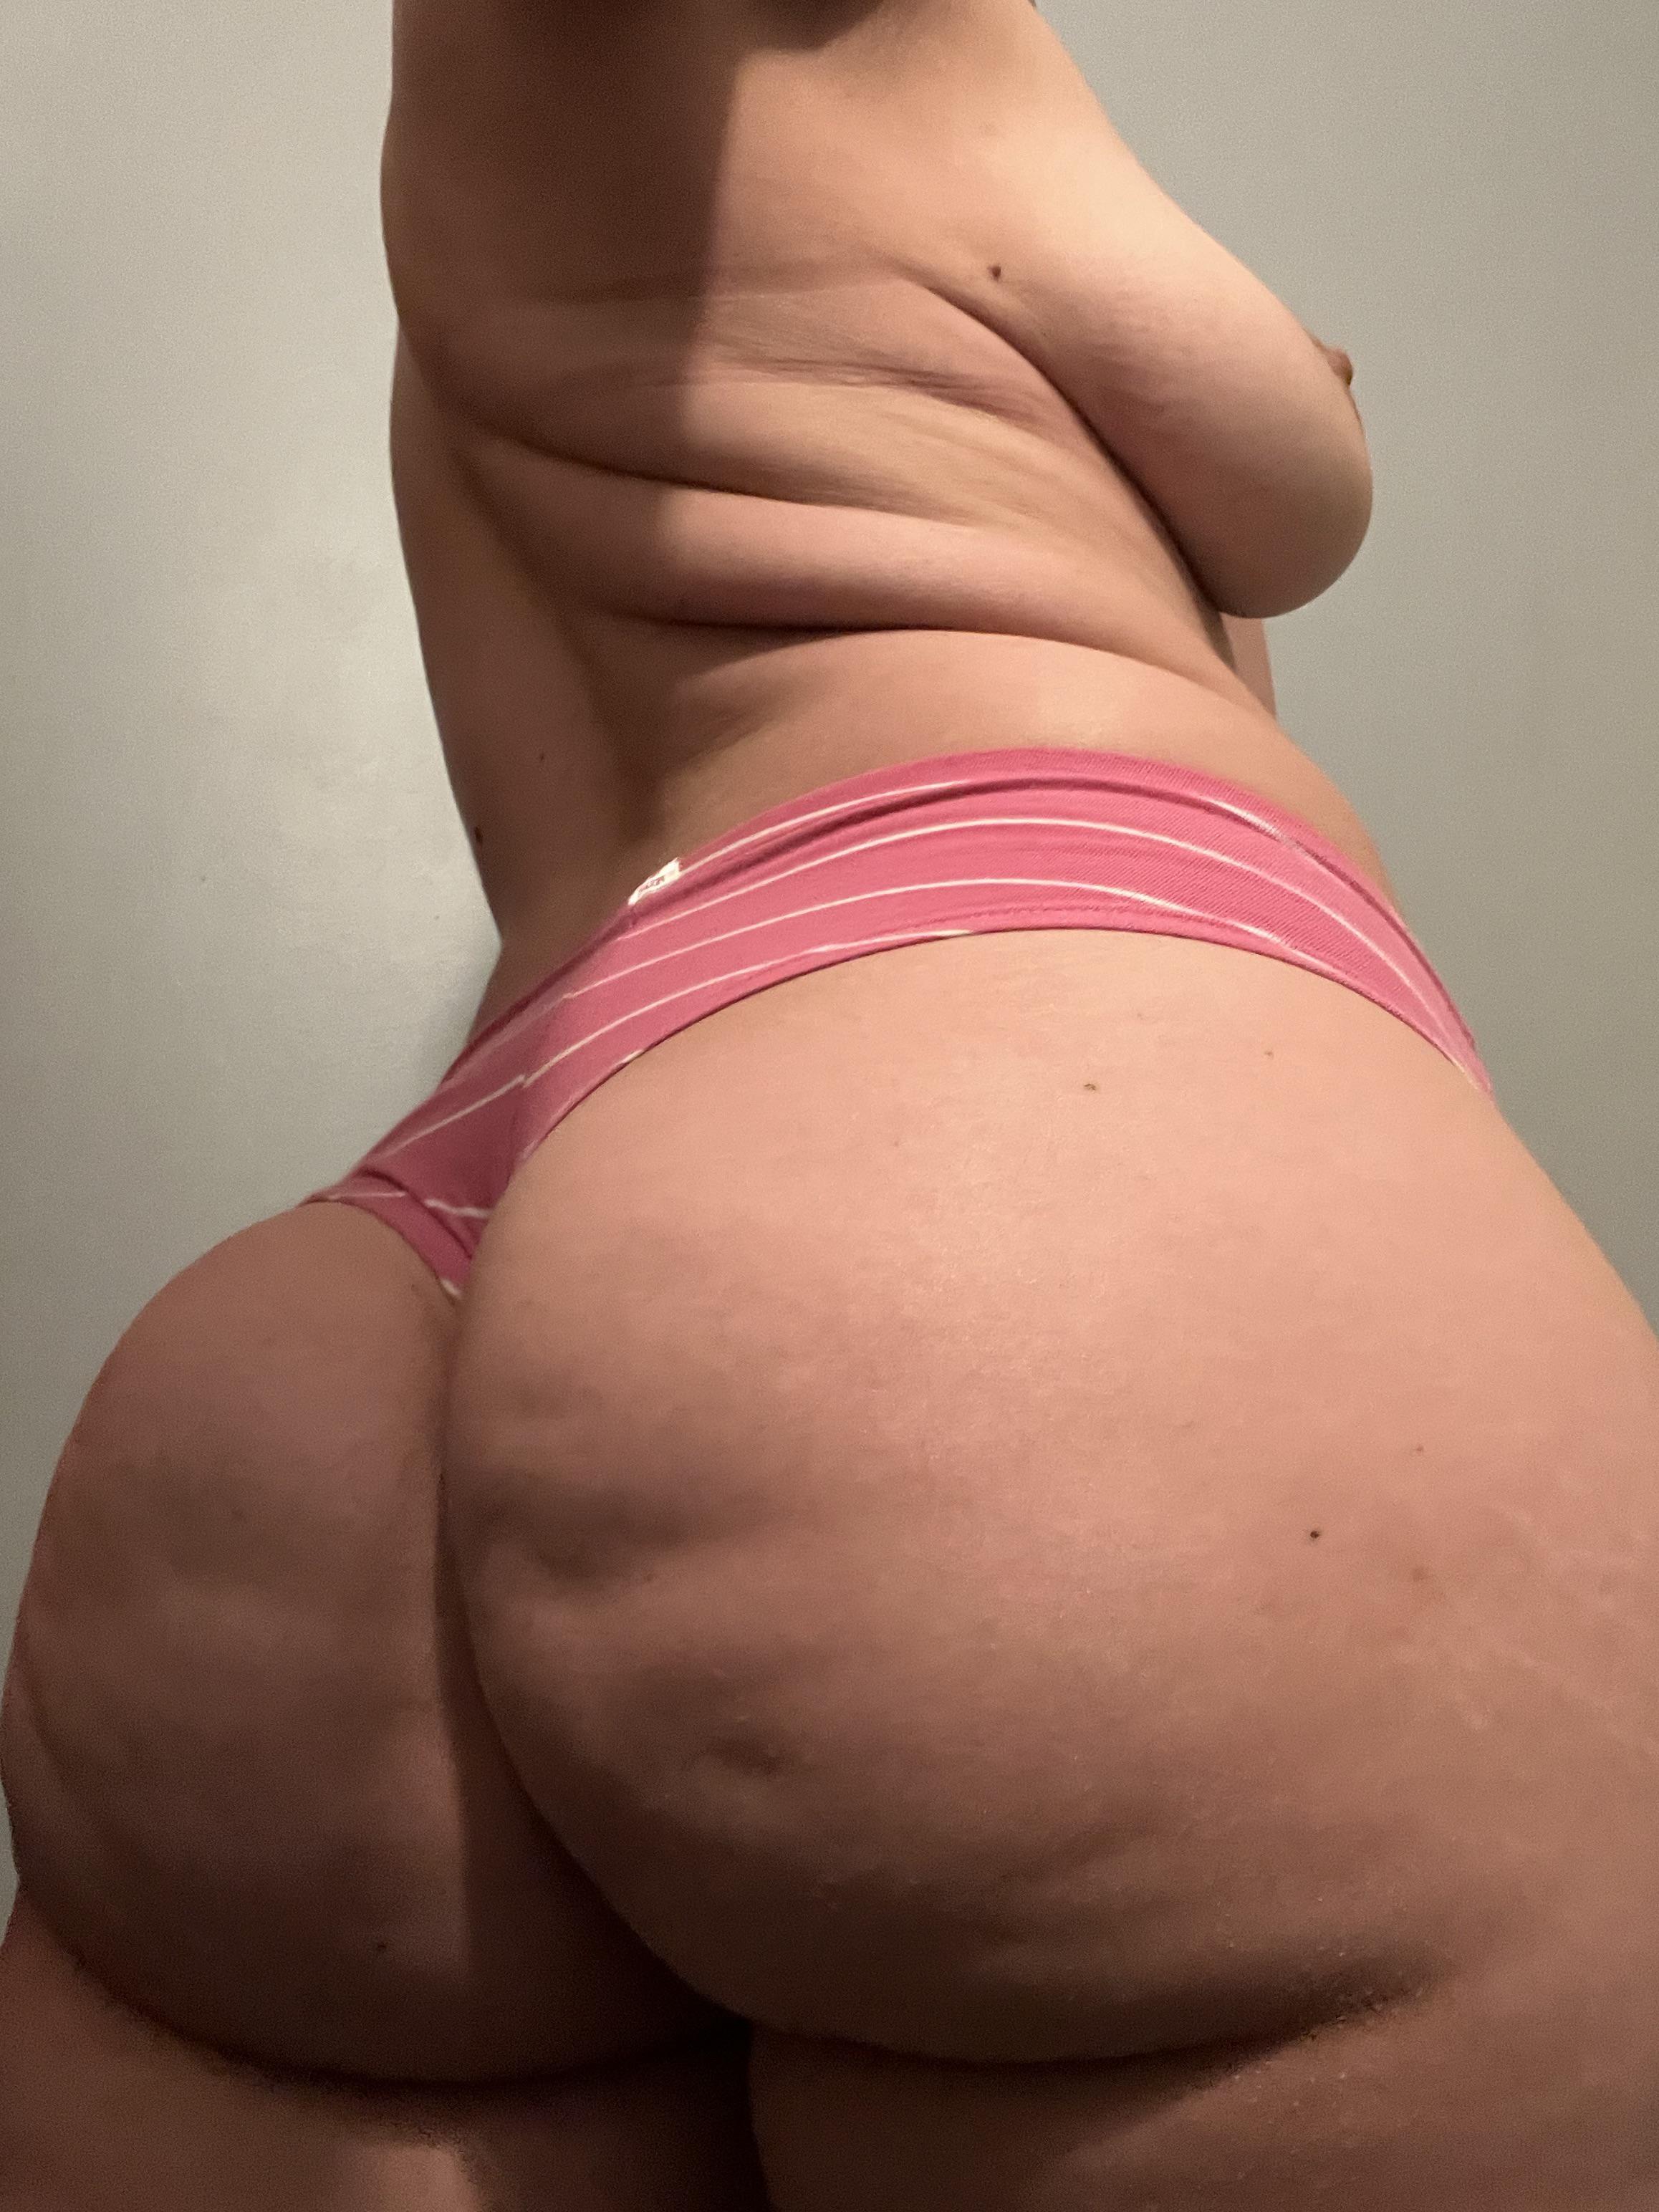 PAWG I come with a built in face warmer…